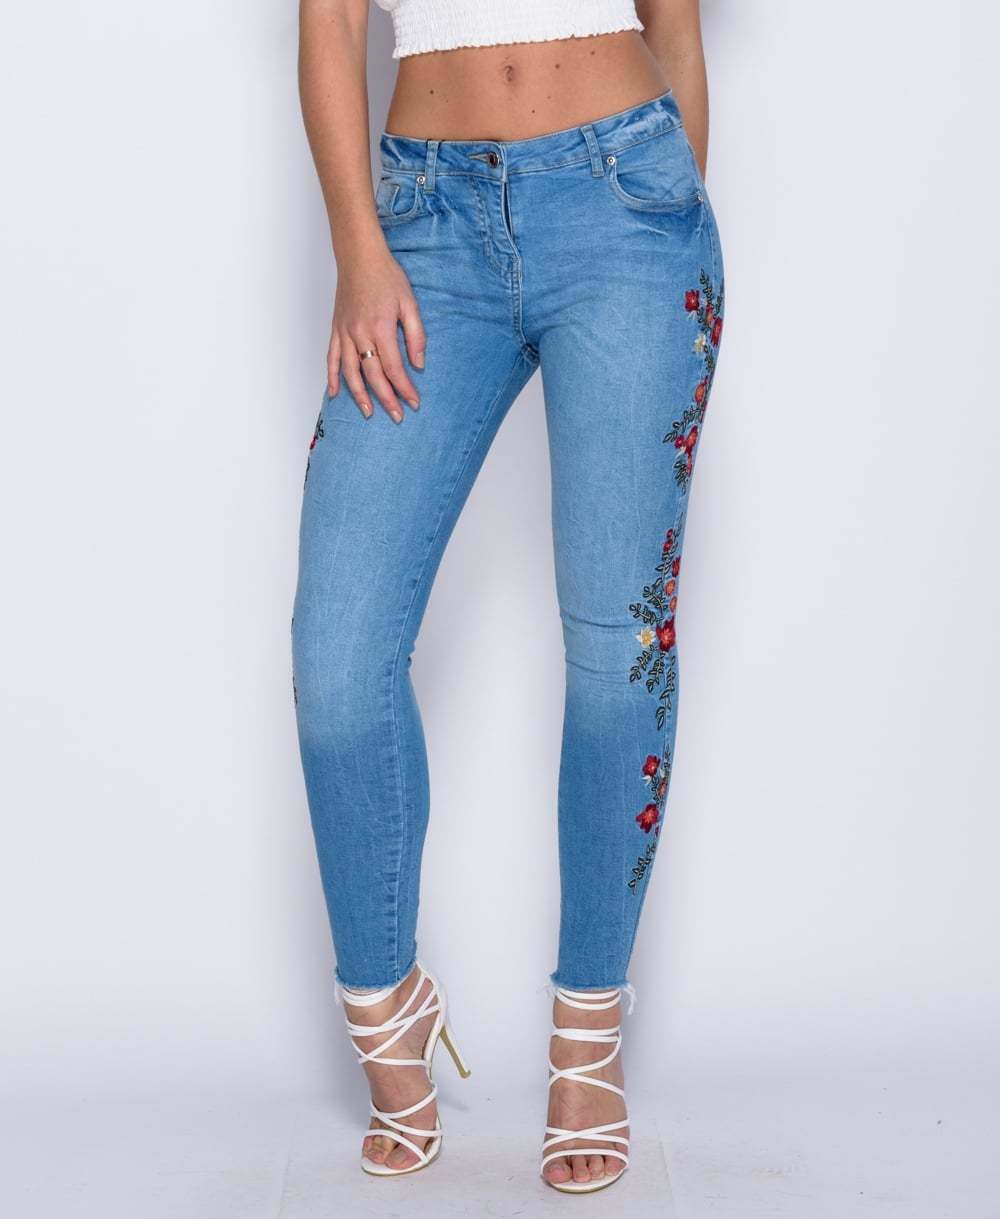 Blue Frayed Hem Jeans with Floral Embroidery Close Up View